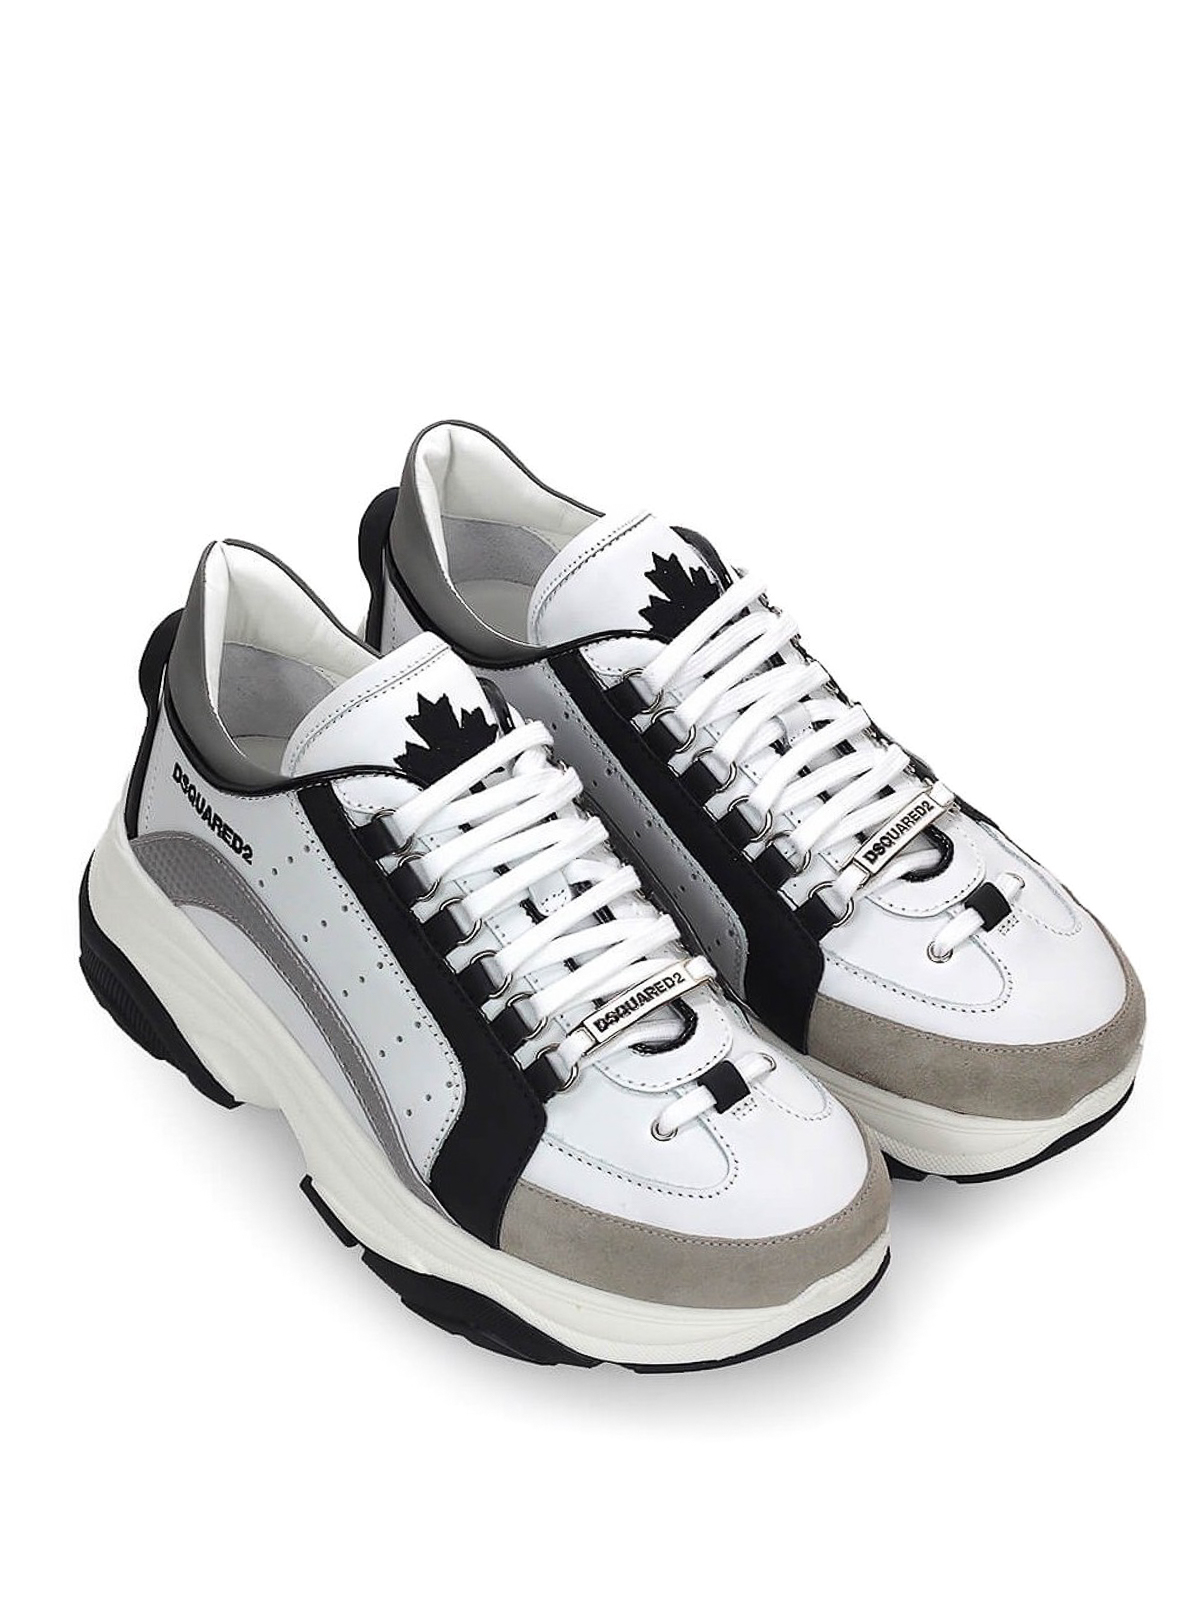 Dsquared2 - Bumpy 551 leather sneakers 